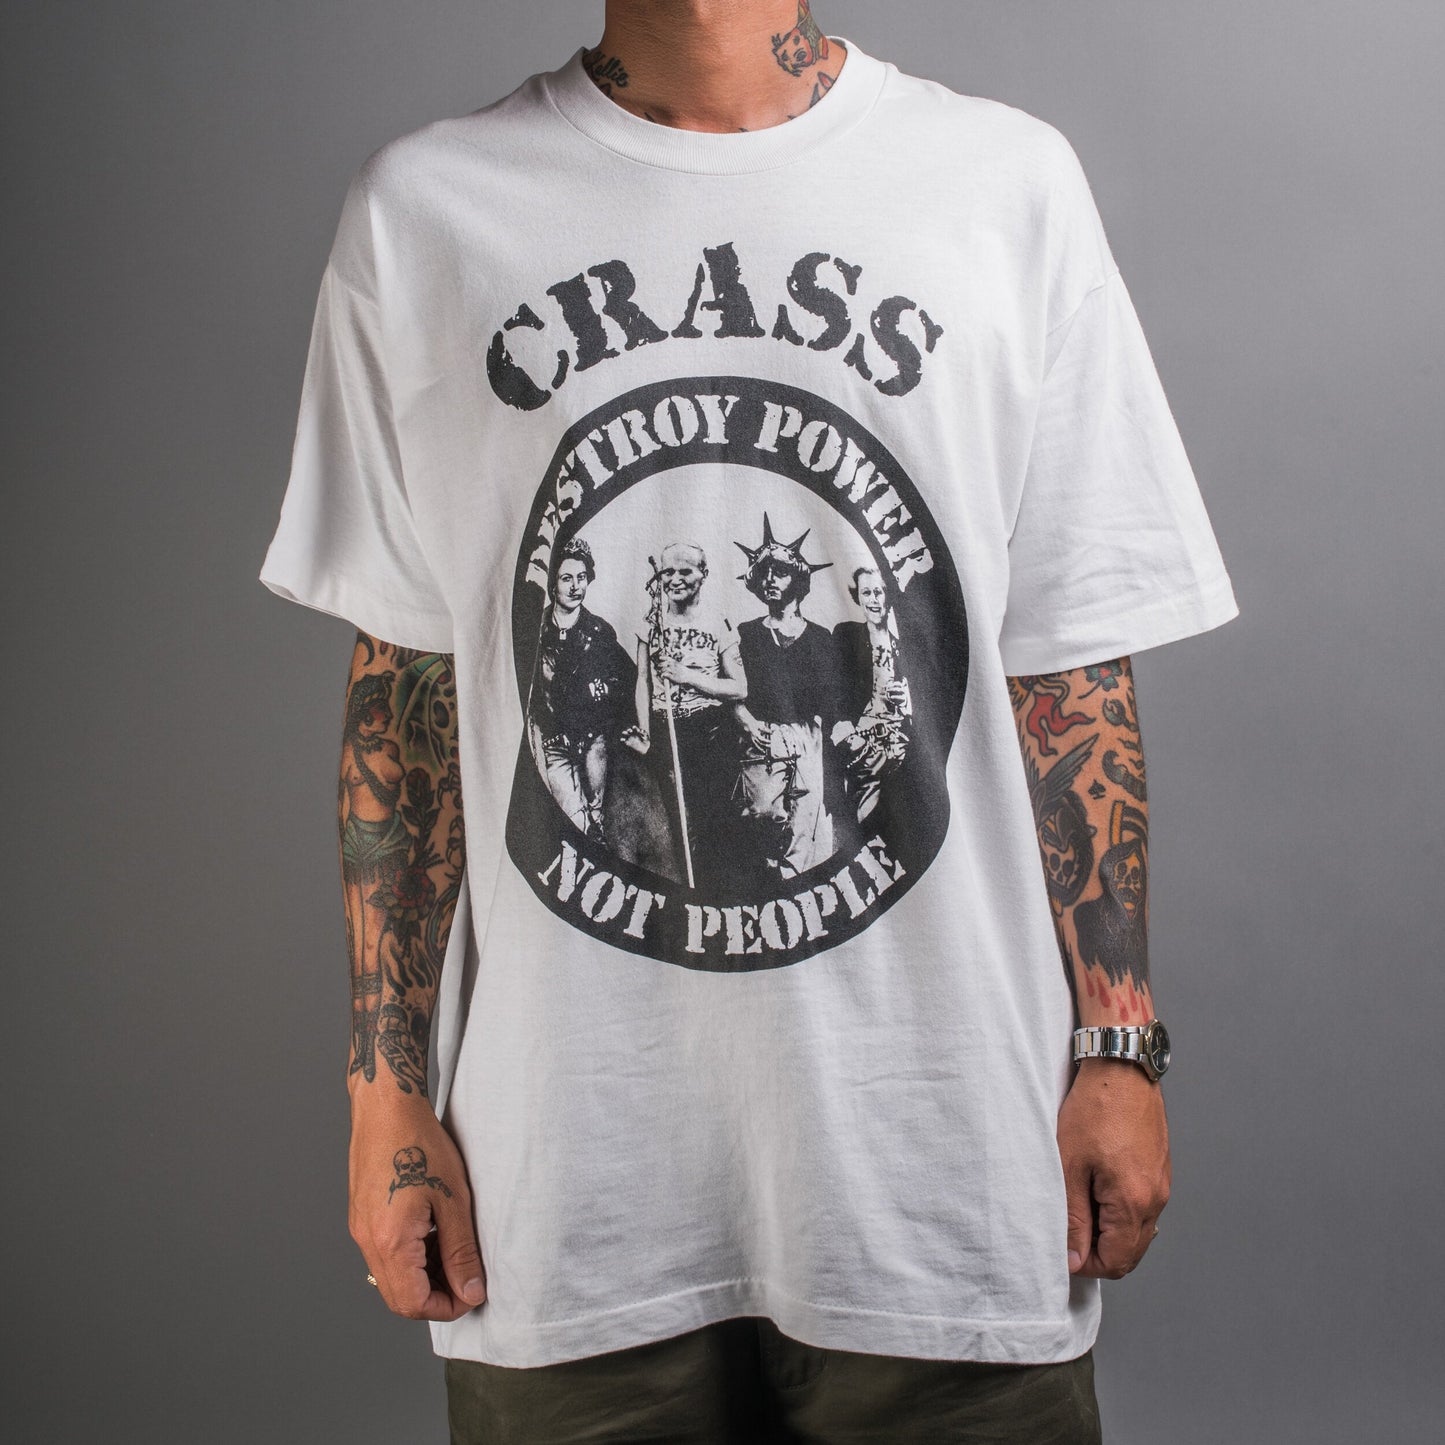 Vintage 90’s Crass Destroy Power Not People T-Shirt